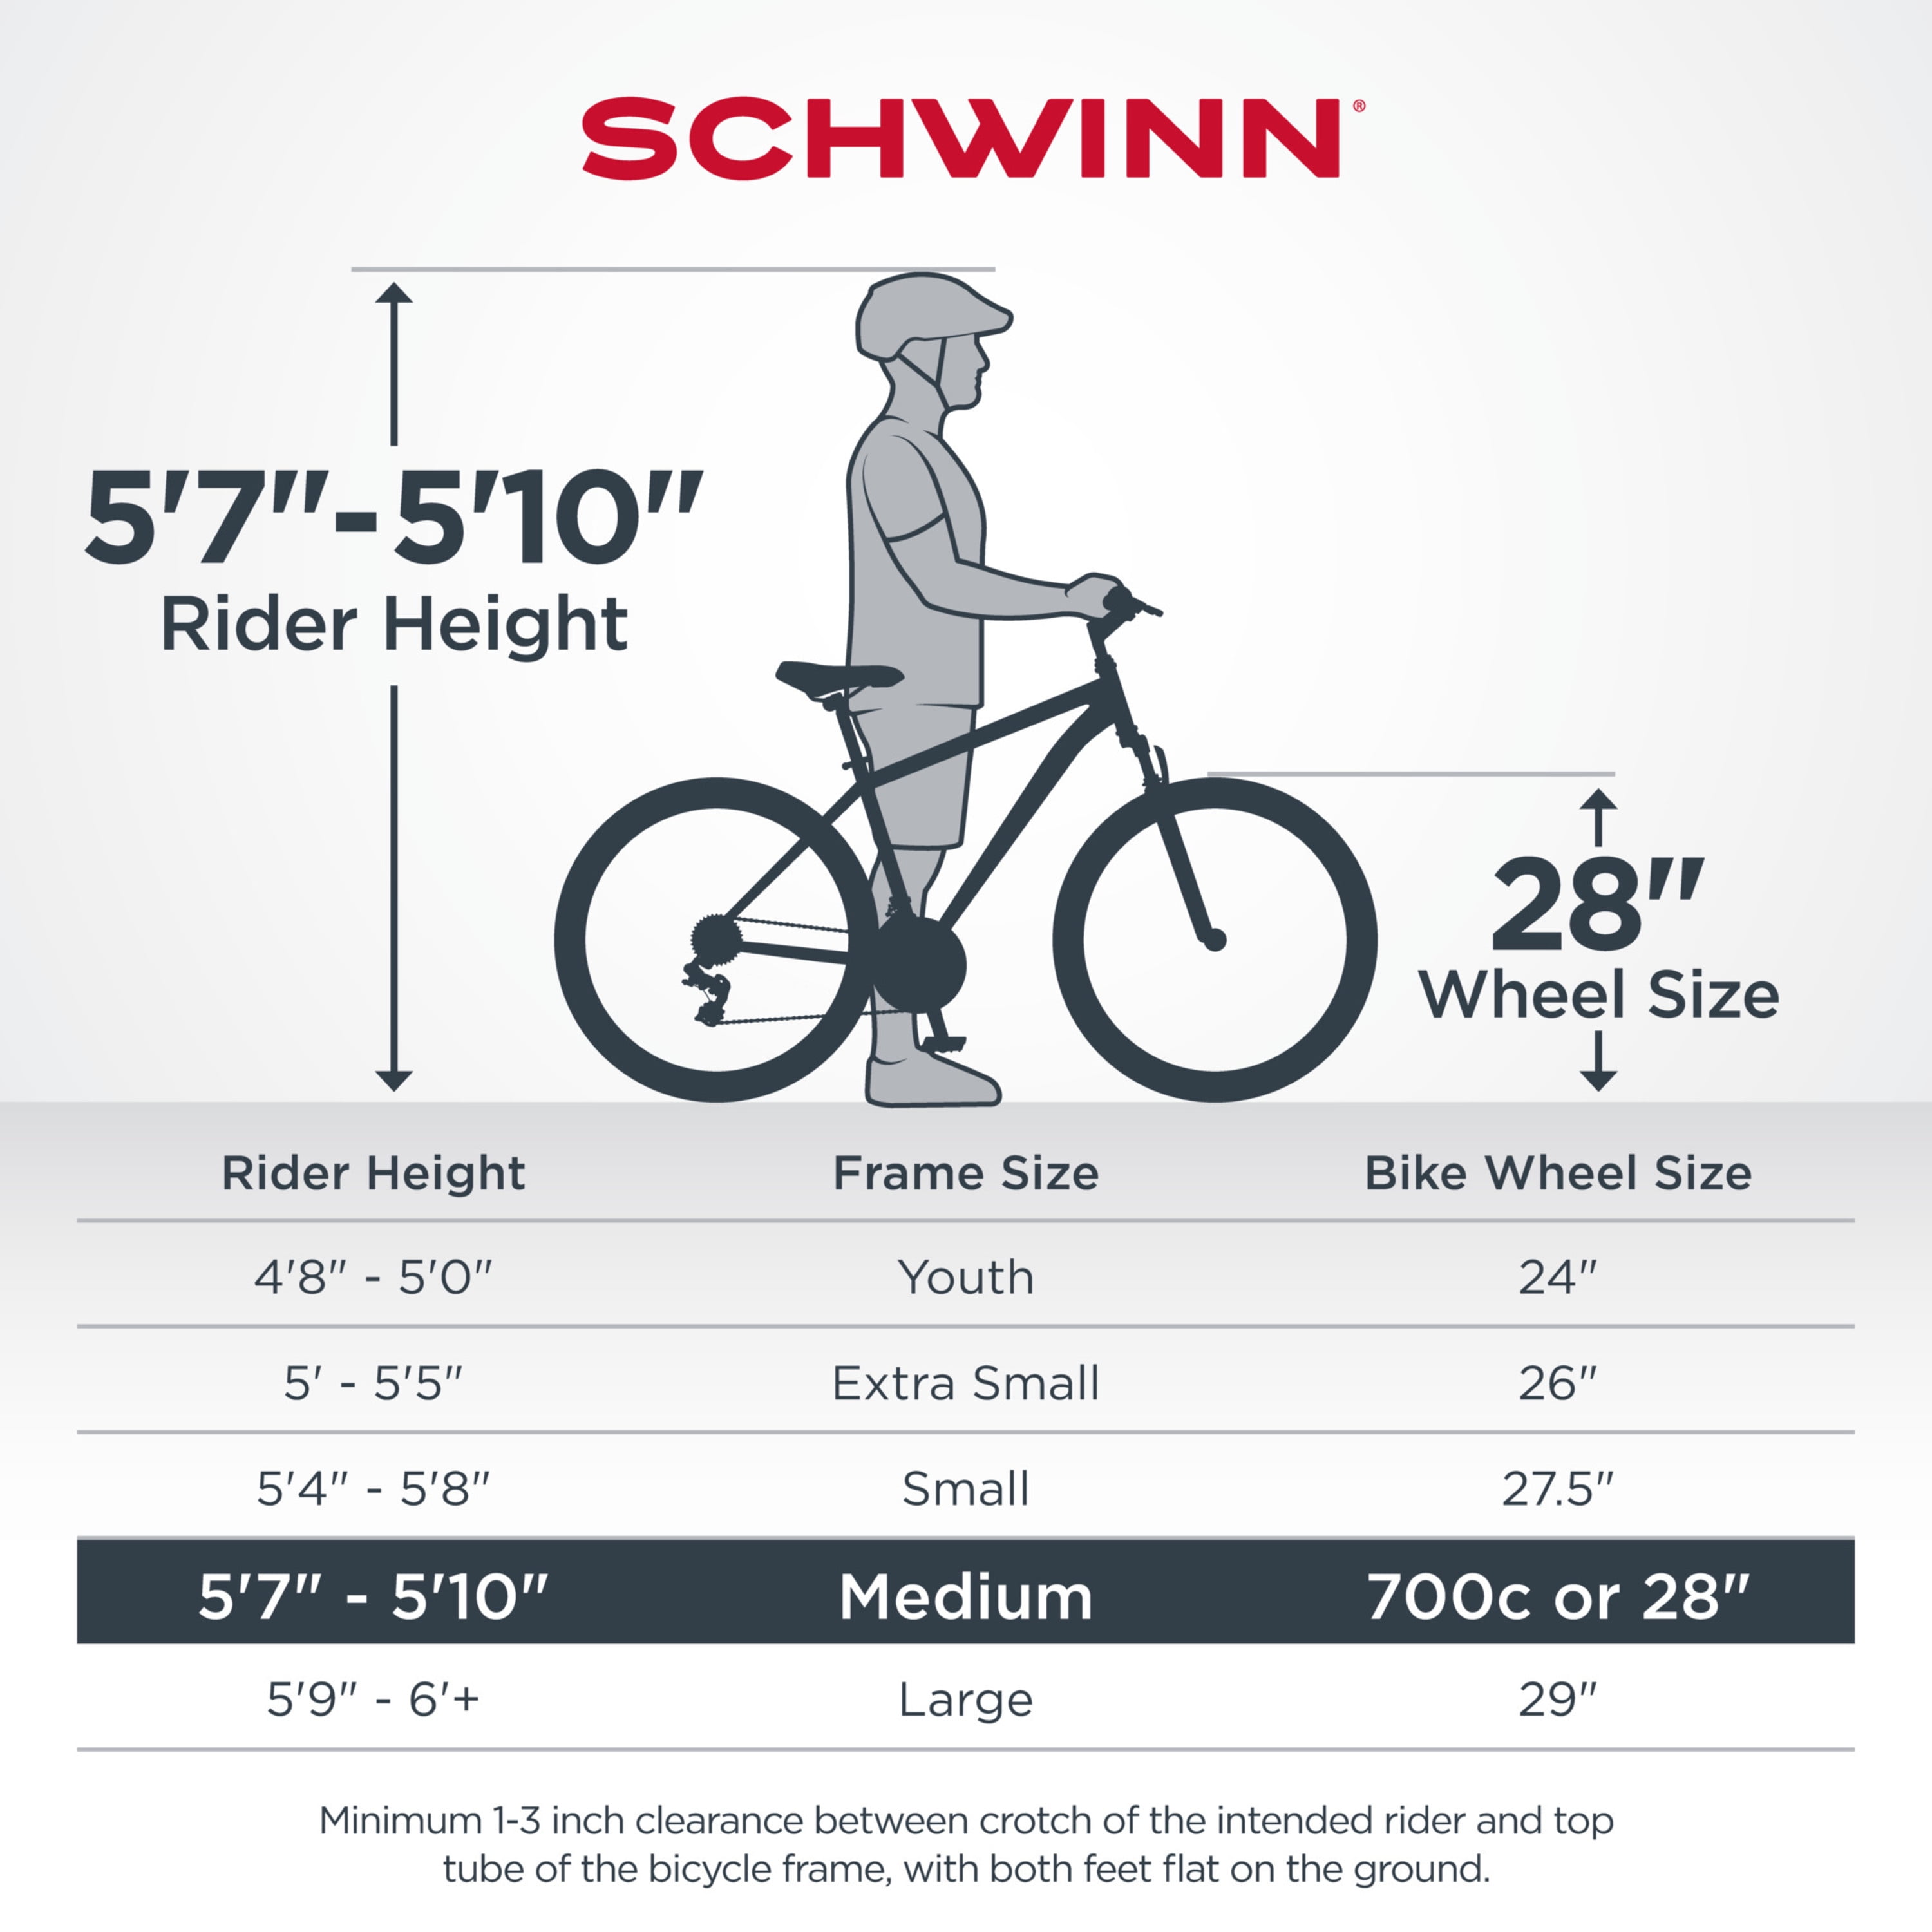 Correct height. Frame Size велосипед. Wheel Size 700c что это. Велосипедная рама 17. Road Bike Size in inches.